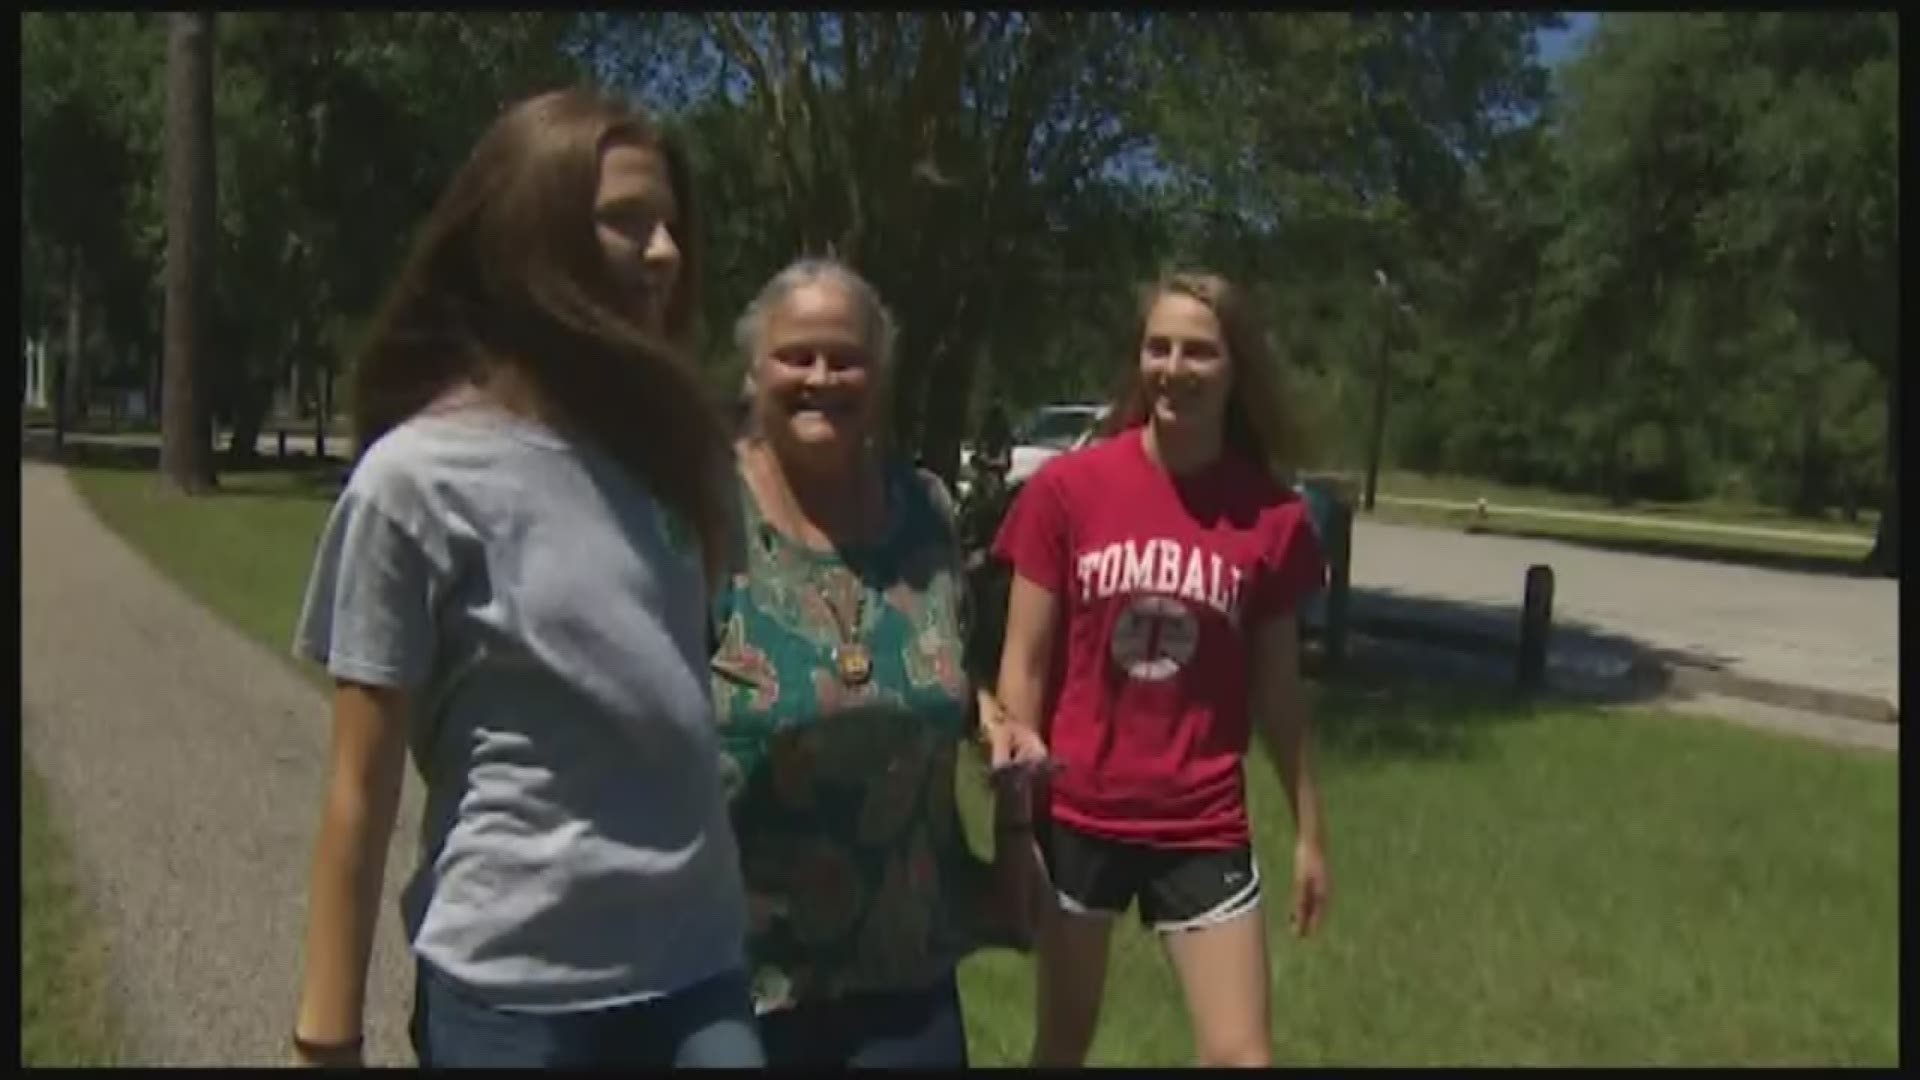 One longtime Tomball Junior High teacher battling a rare tumor is getting ready to take her dream trip this summer. It's all thanks to some of her students, who helped raised thousands of dollars to make it happen.